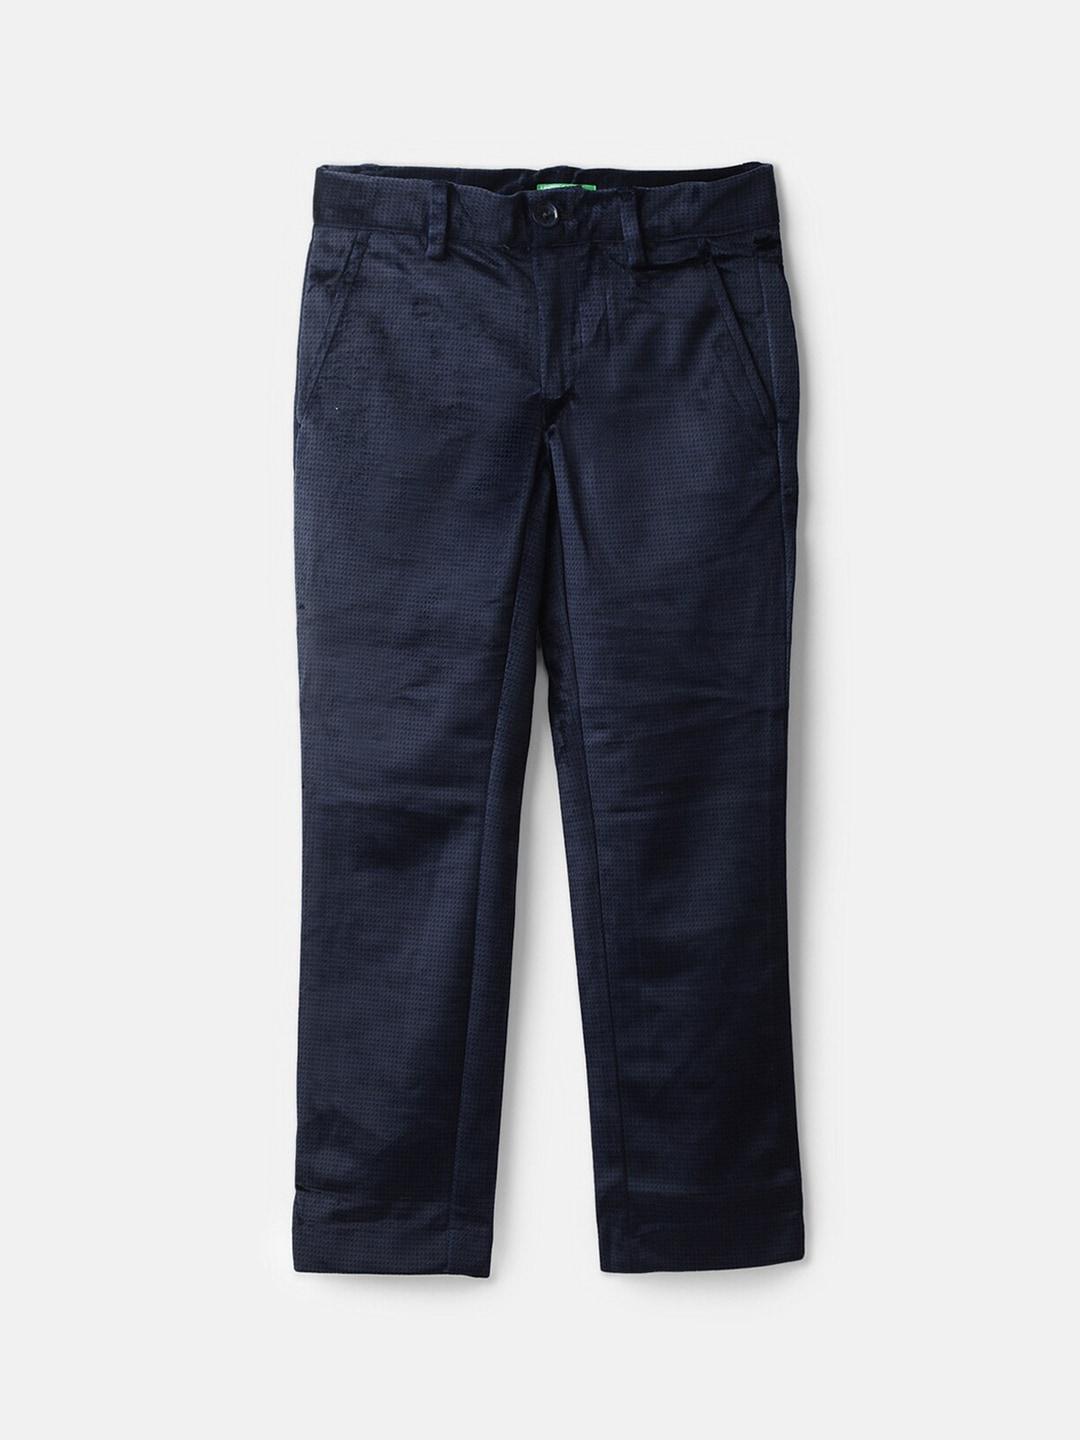 United Colors of Benetton Boys Navy Blue Trousers